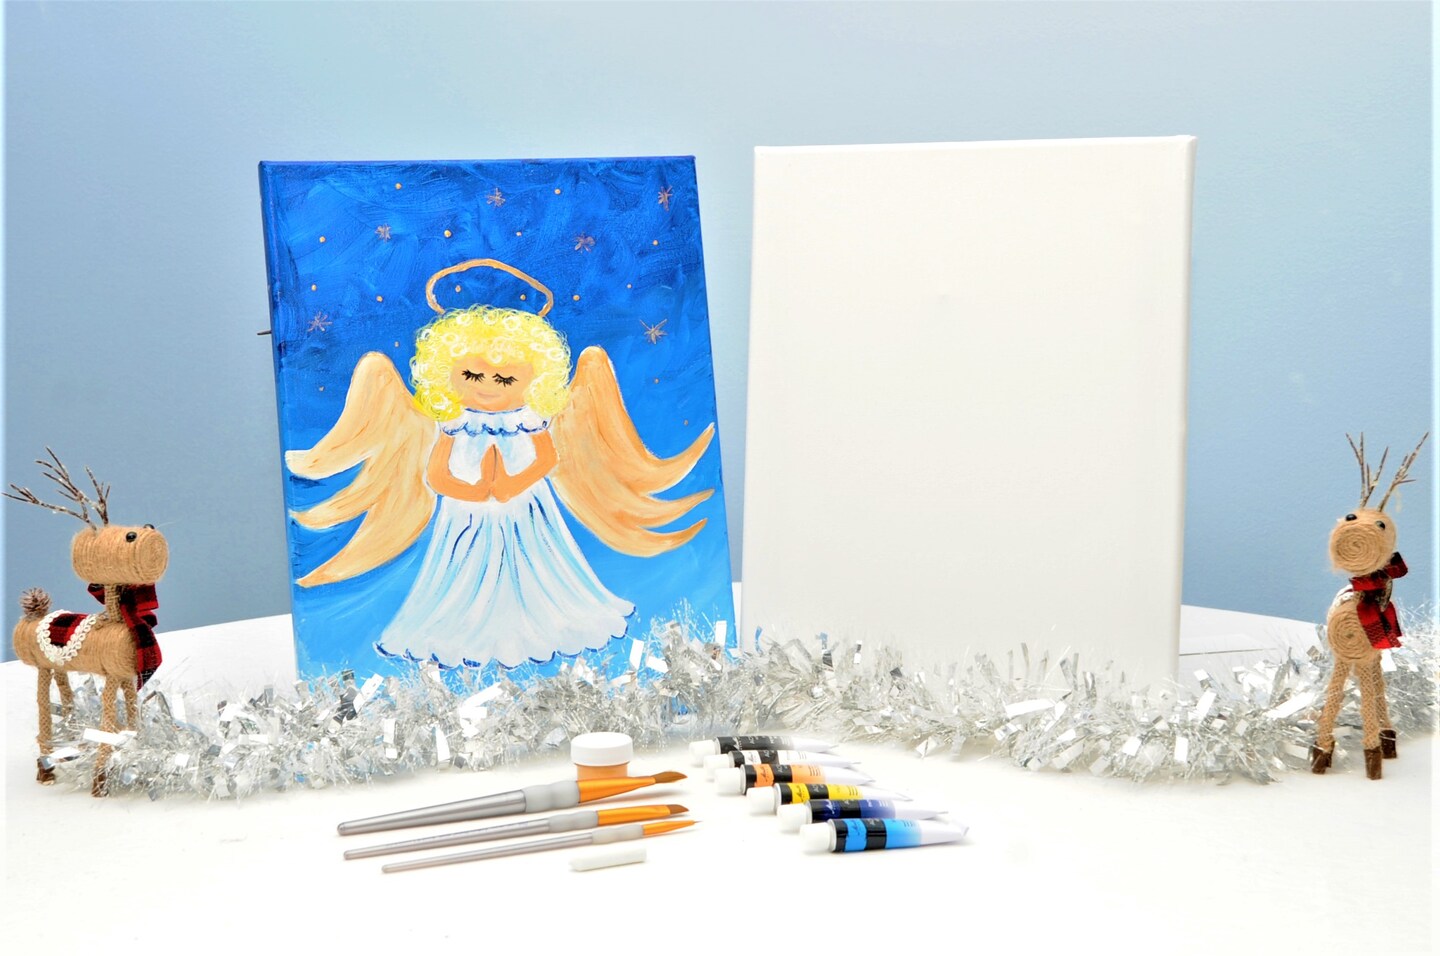 Paint Kit - Ruby's New Wings Acrylic Painting Kit and Video Lesson